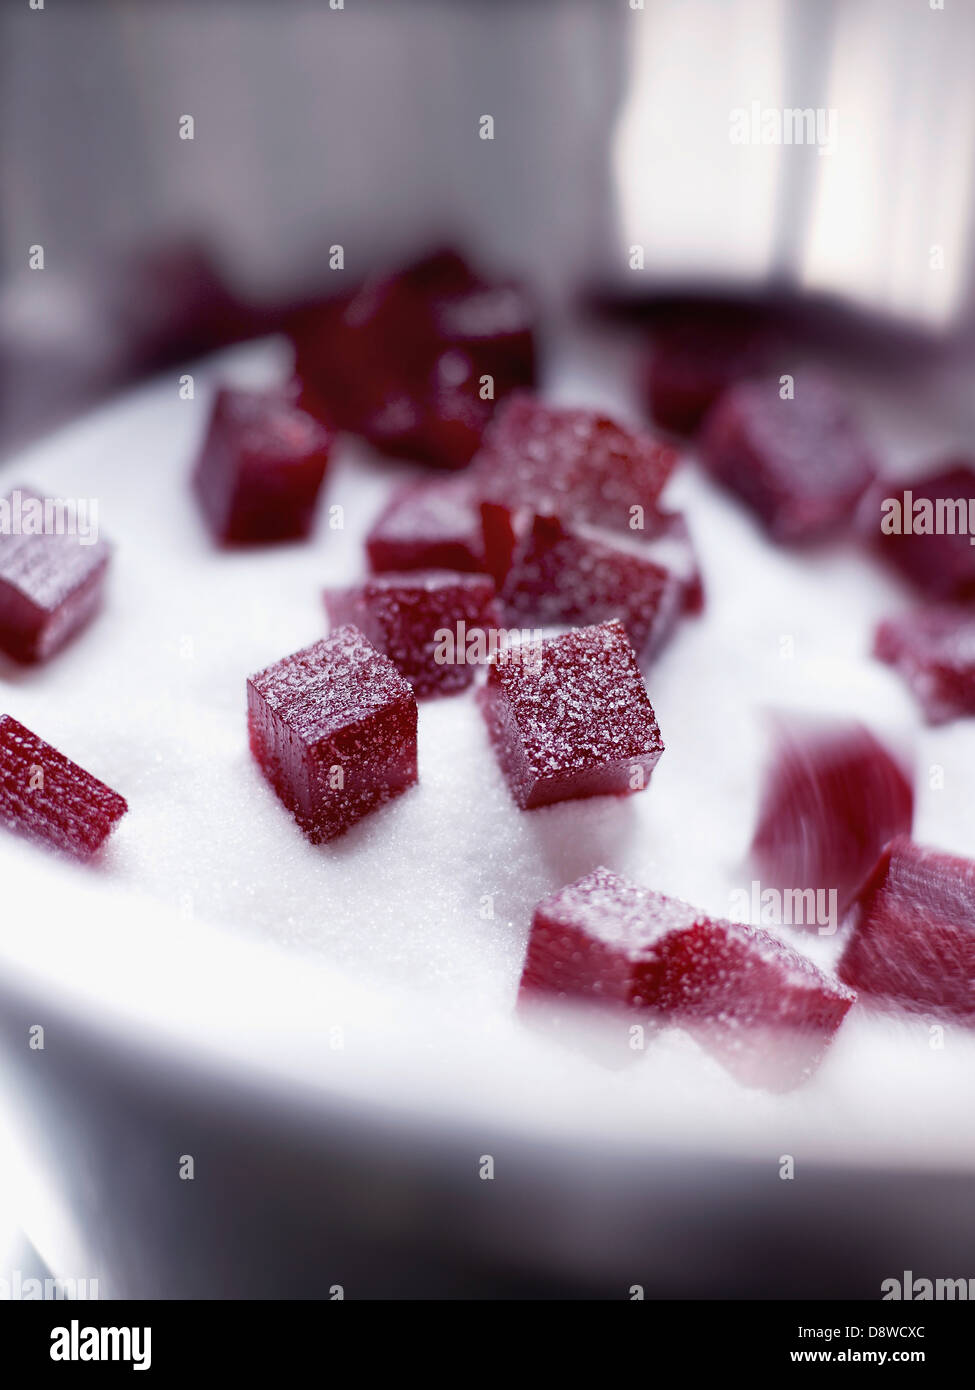 Squares of fruit paste coated in sugar Stock Photo